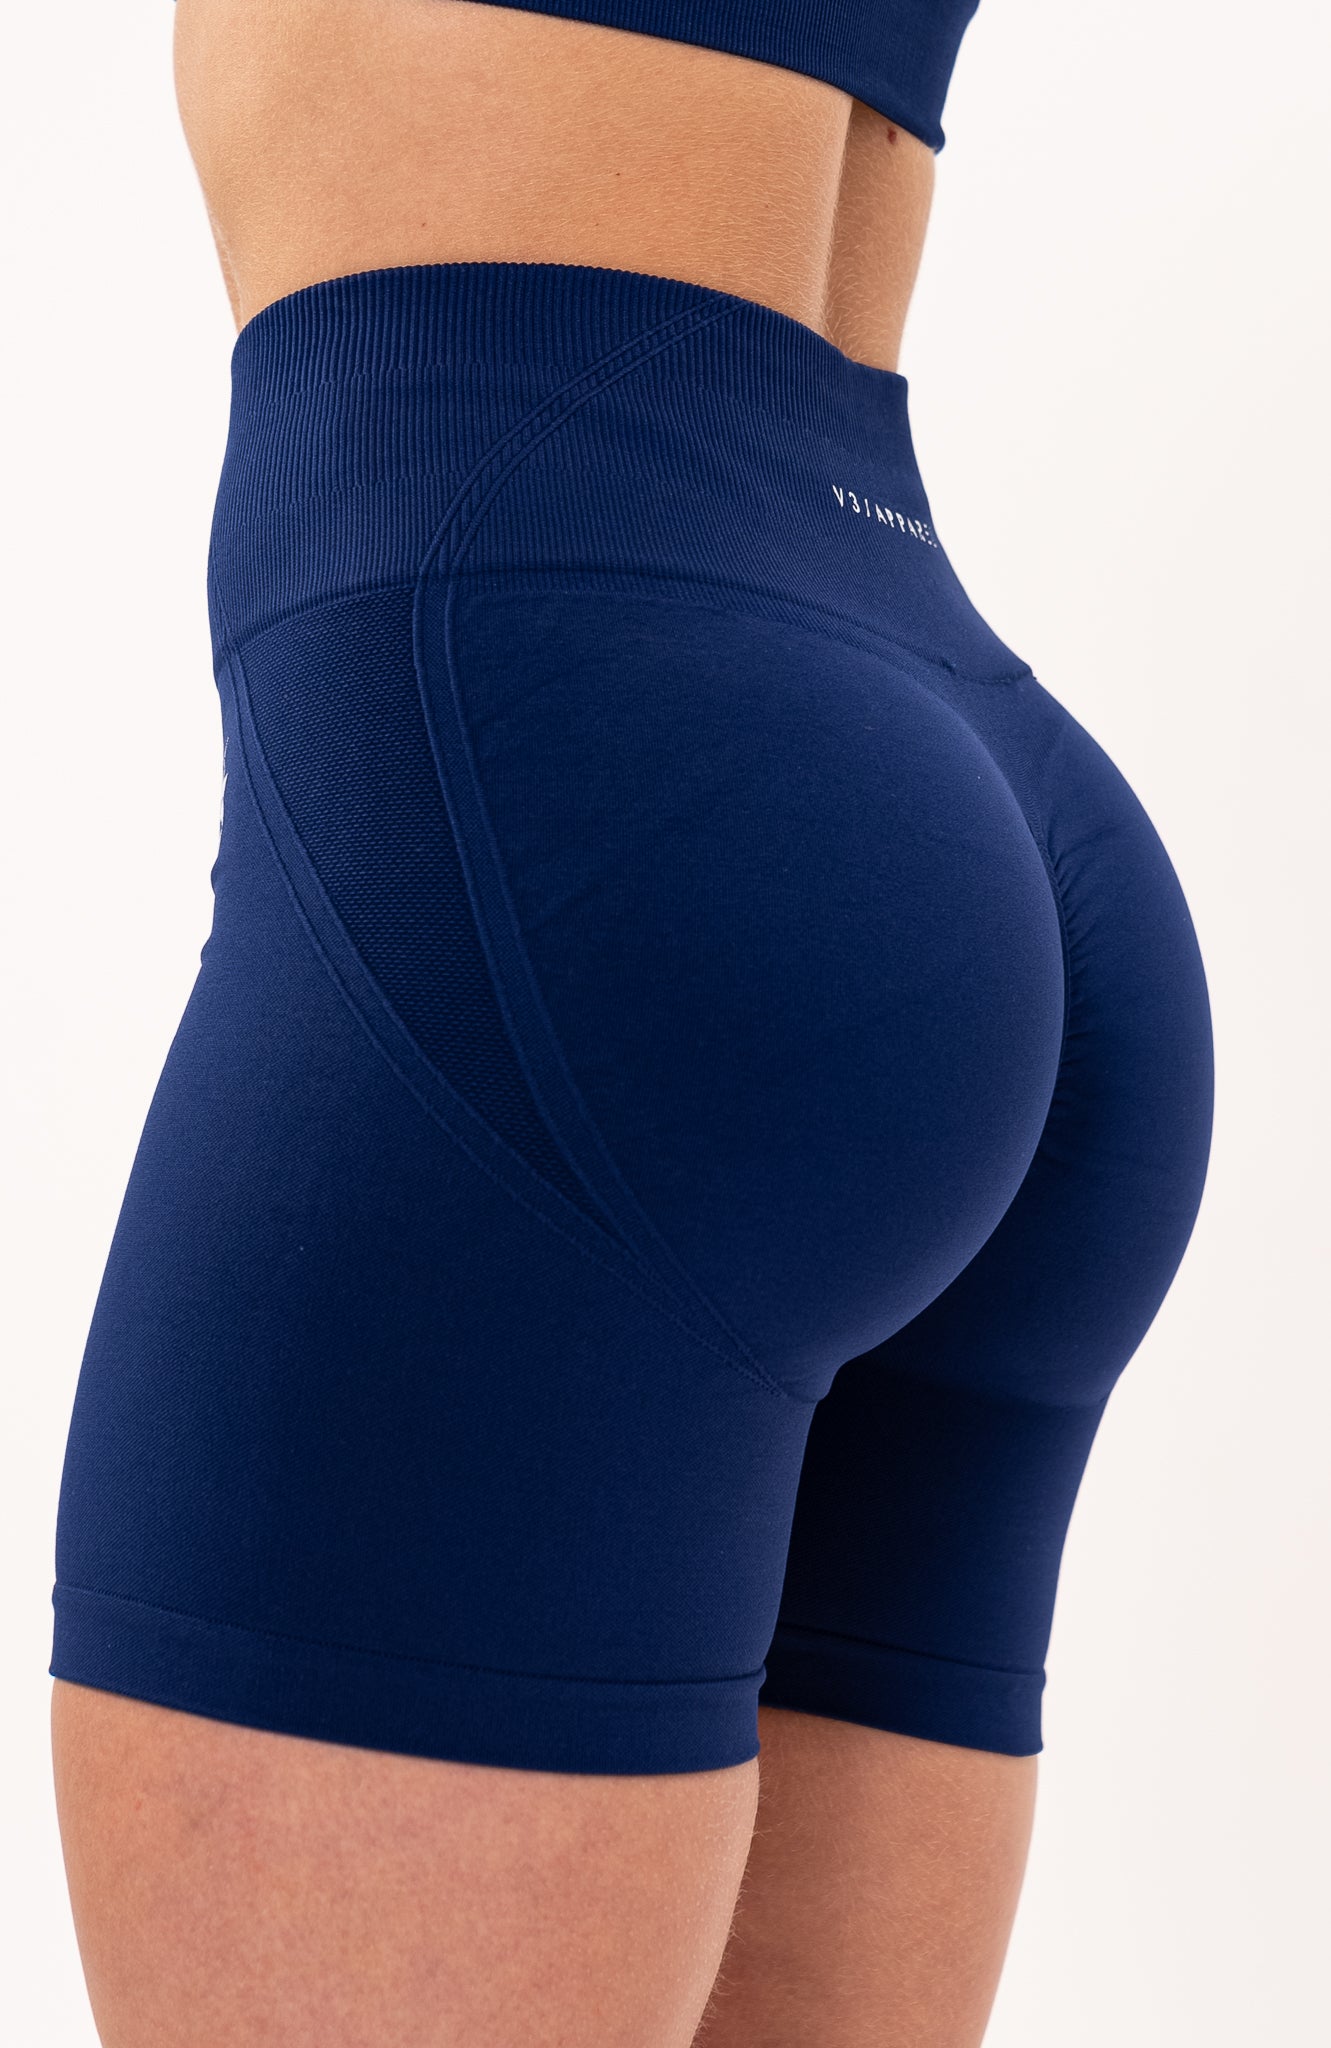 redbaysand Women's Tempo seamless scrunch bum shaping high waisted cycle shorts in navy royal blue – Squat proof 5 inch leg gym shorts for workouts training, Running, yoga, bodybuilding and bikini fitness.